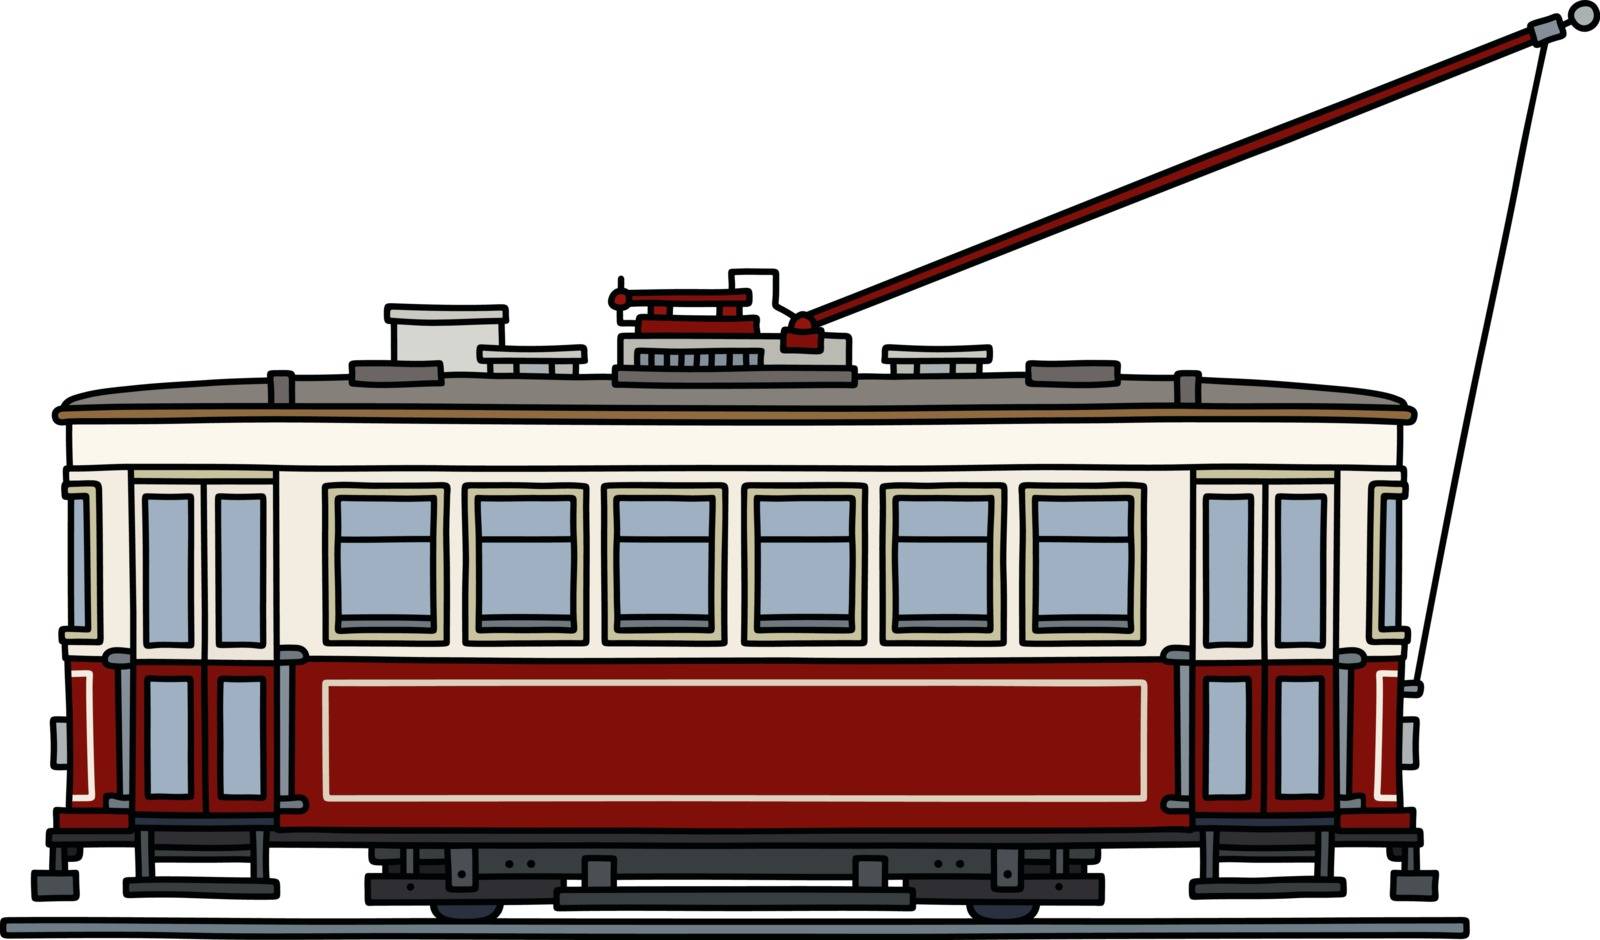 The classic red tramway by vostal